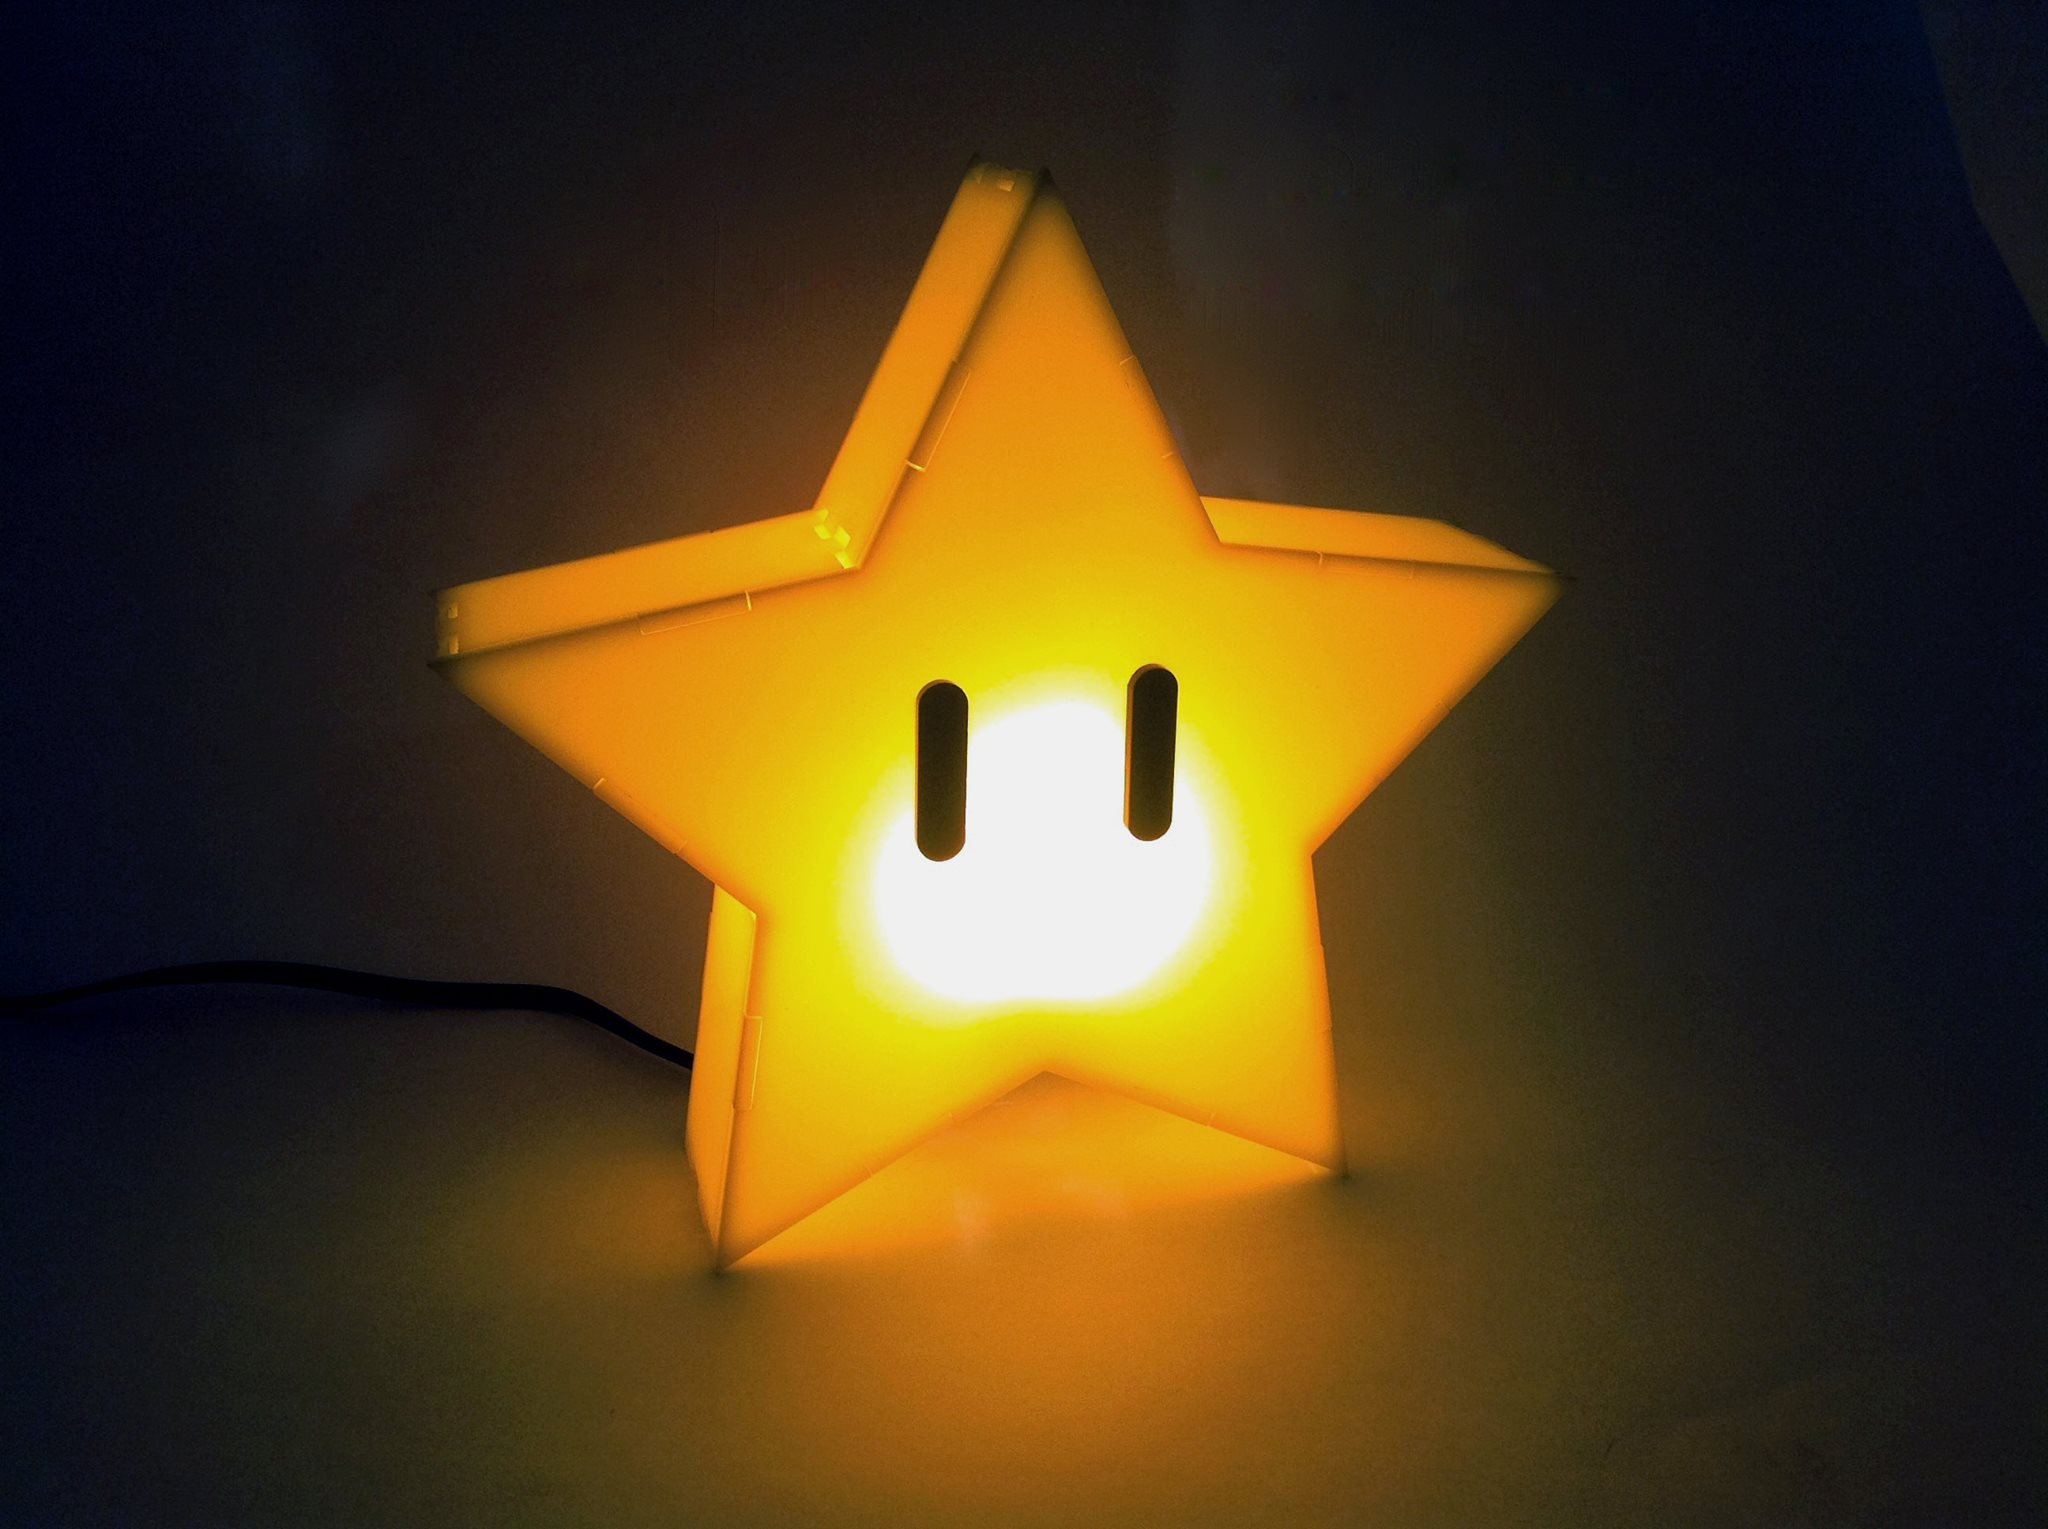 ... another lamp; a Super Mario Brothers Star lamp. Aka a Super Star